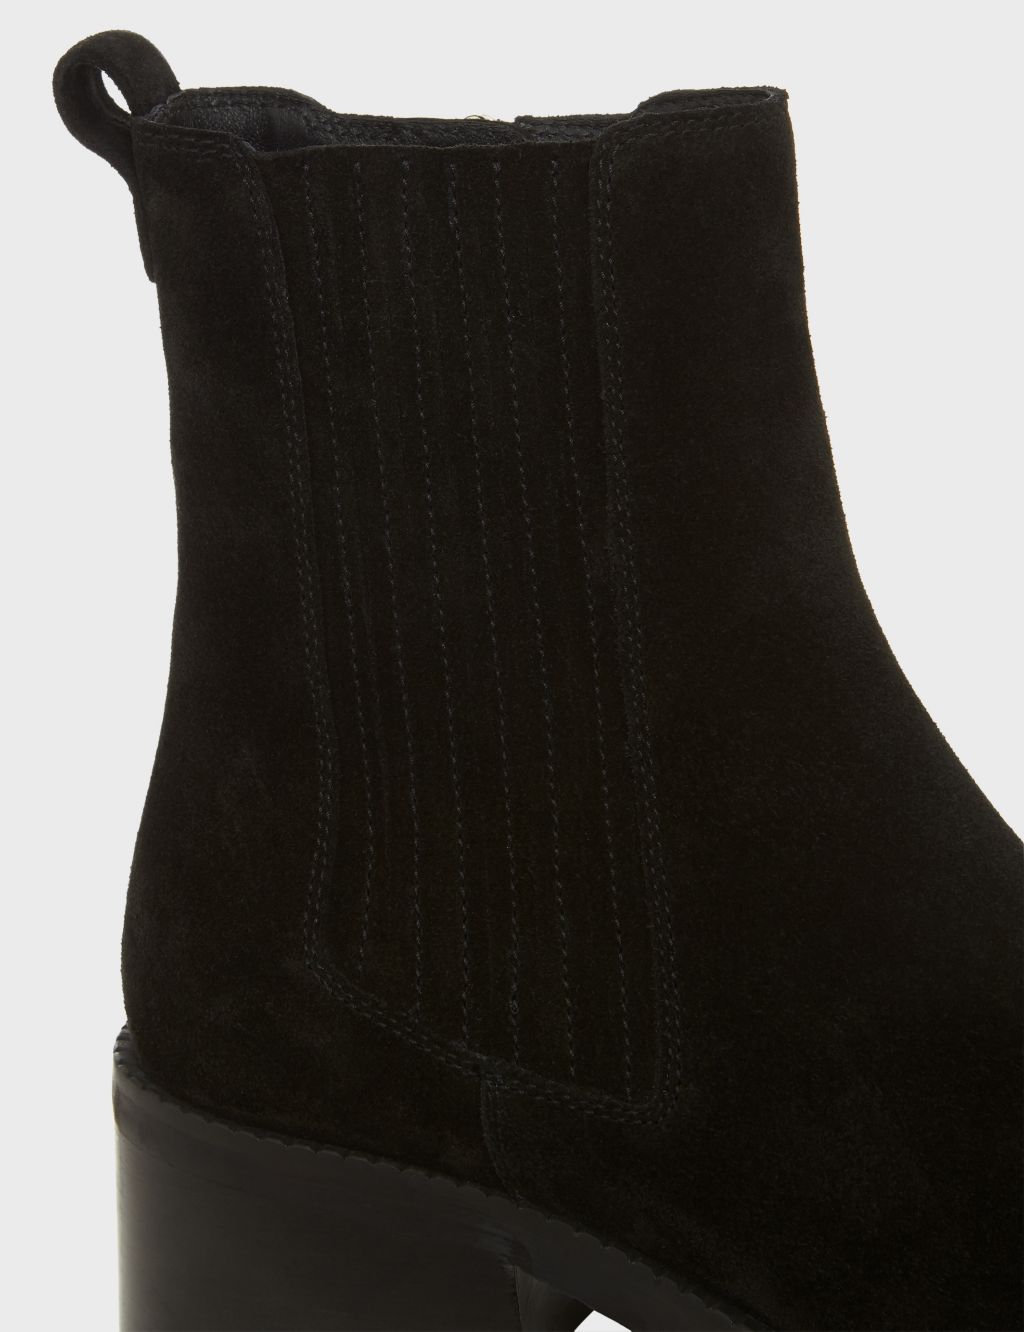 Suede Block Heel Square Toe Ankle Boots image 4